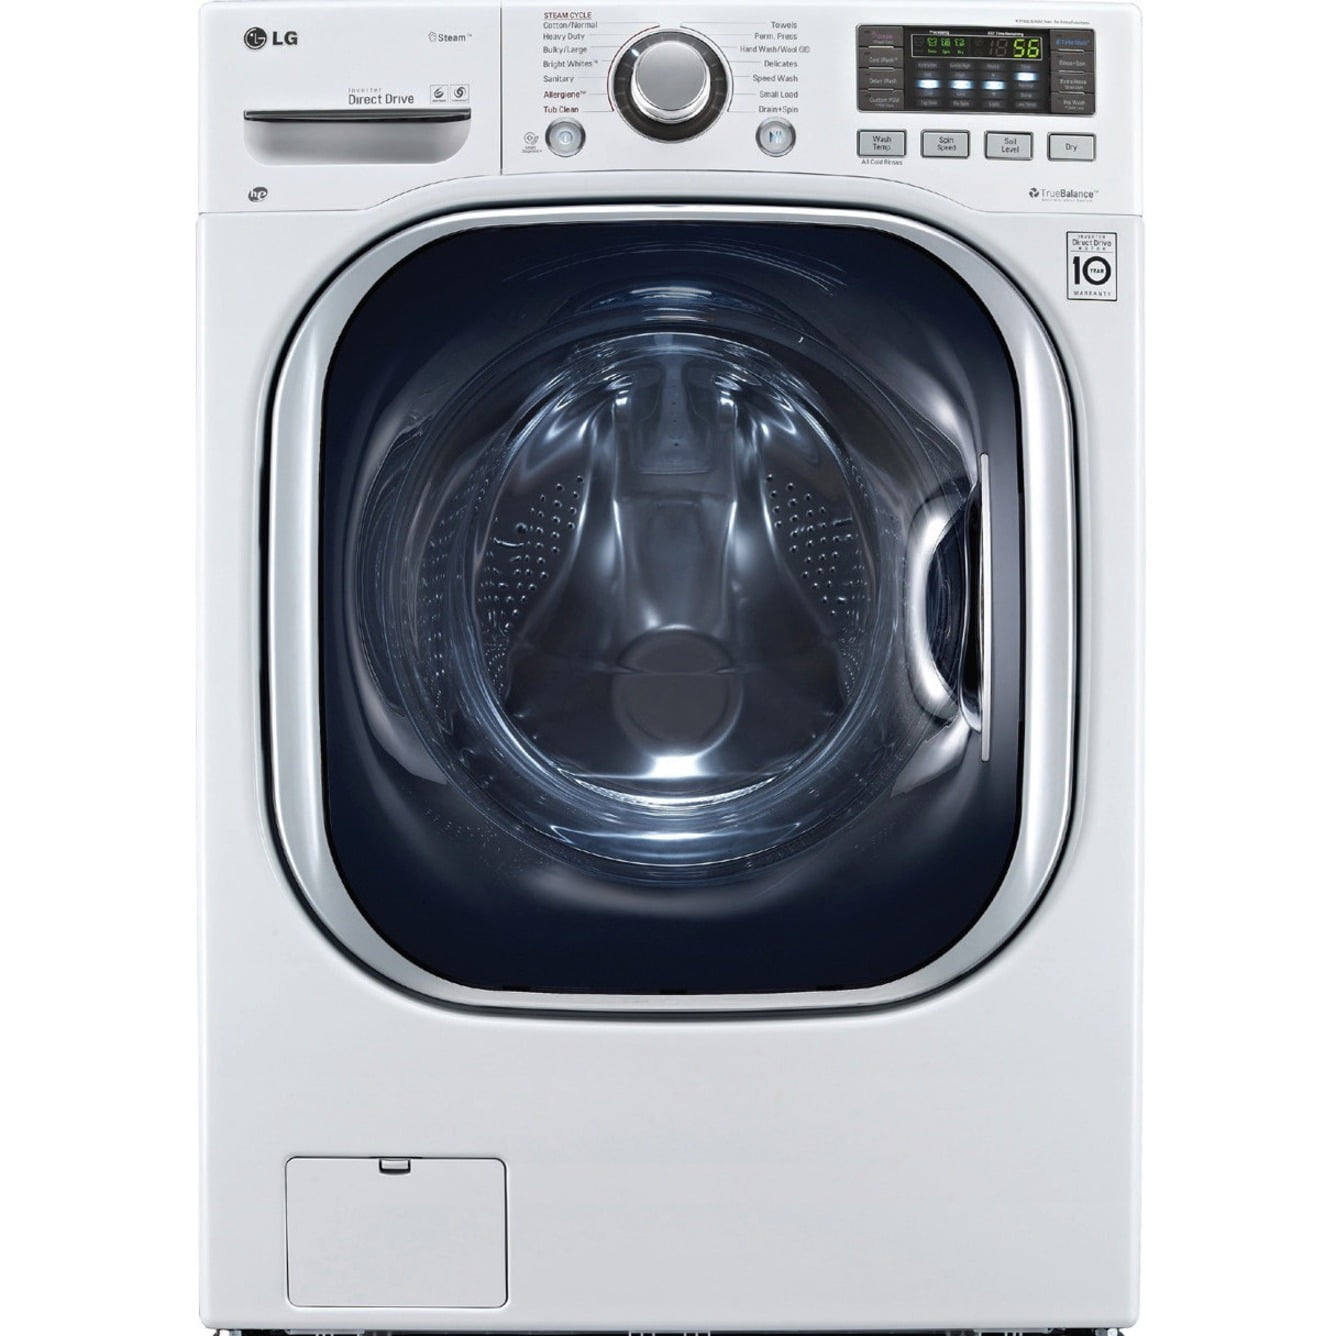 EEEkit Washing Machine Cover with Storage Bag for Front Load Washer Dryer, W29*d28*h43 inch, Size: 29 x 28 x 43, Black